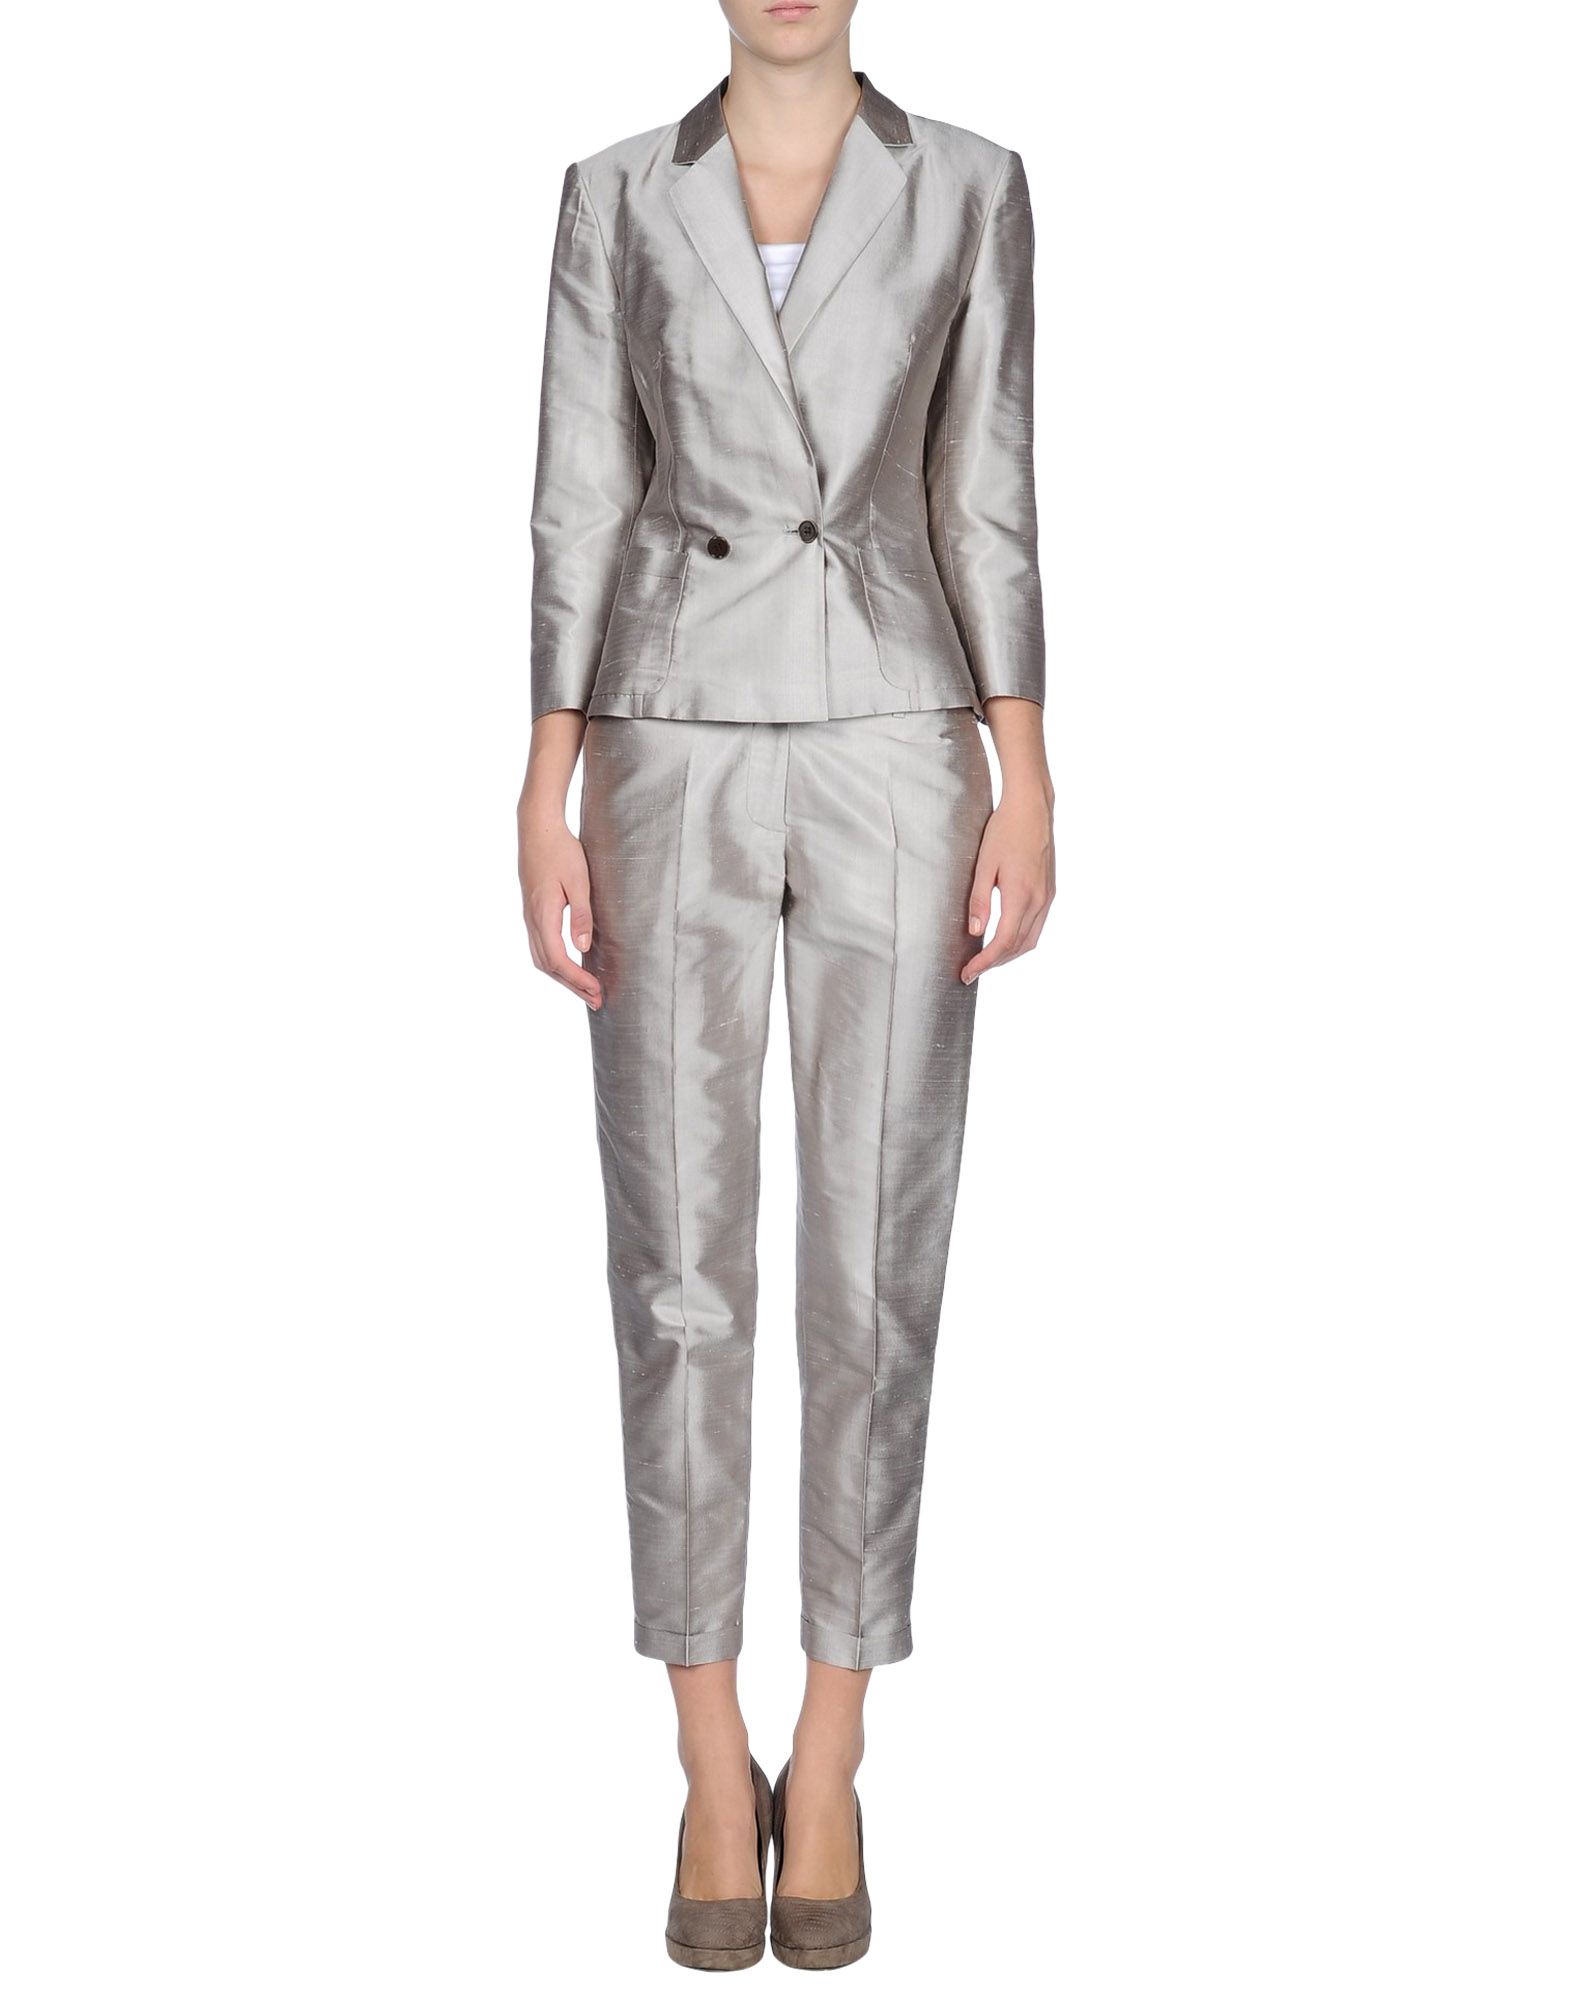 Mauro Grifoni Womens Suit in Silver (Light grey) | Lyst